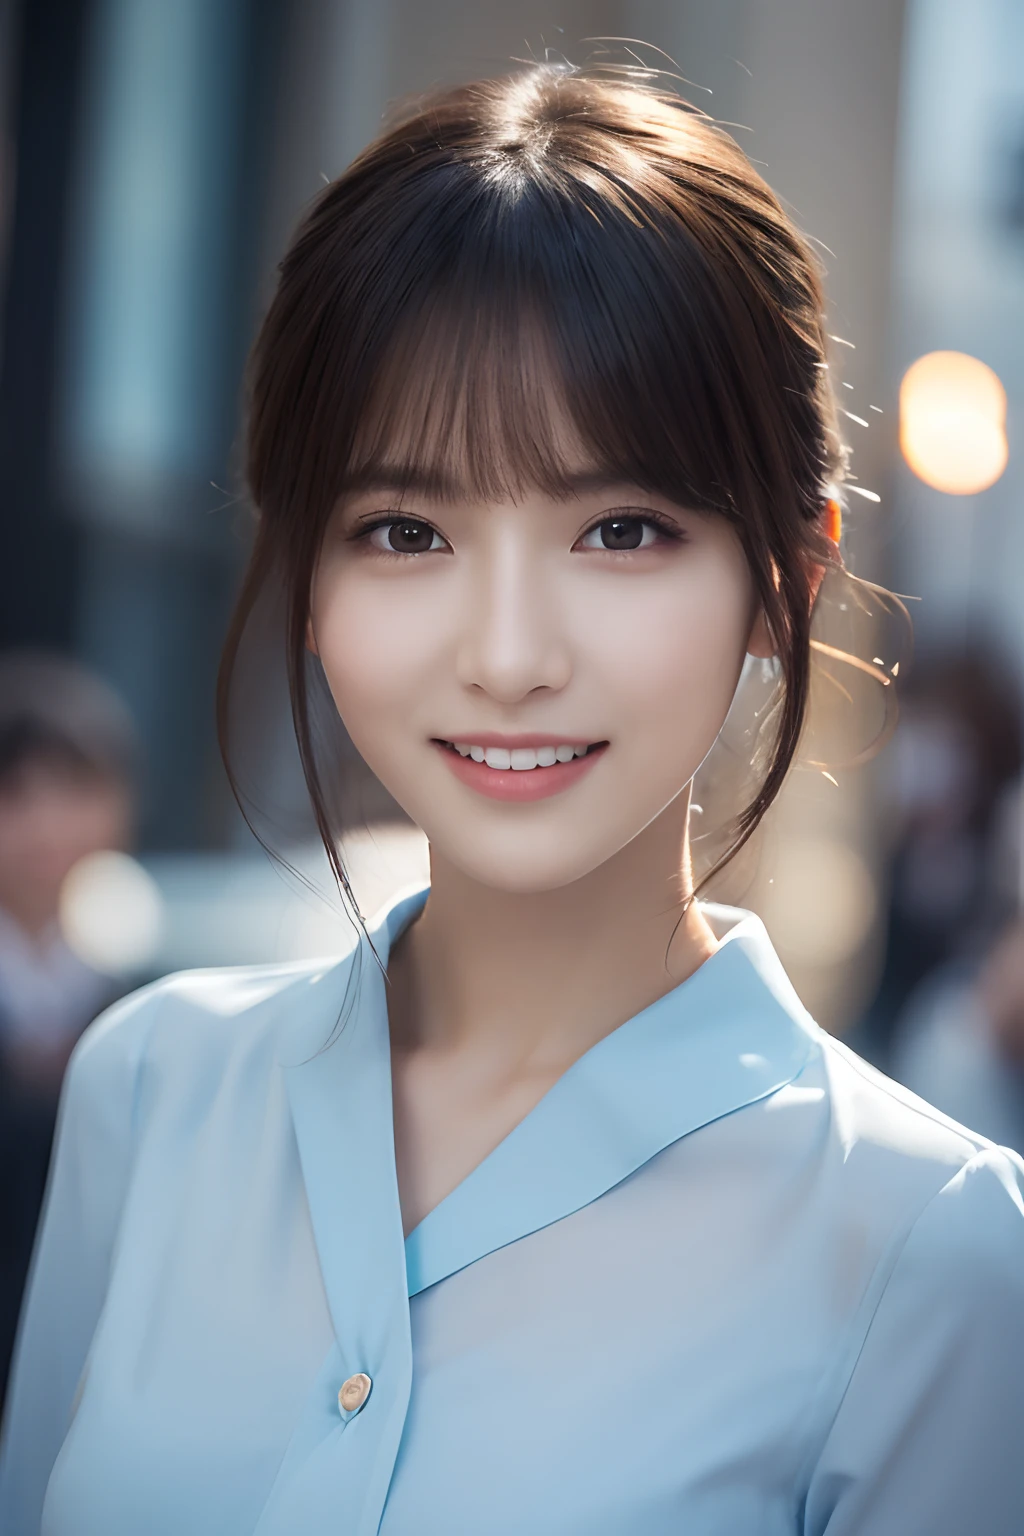 1girl in, (Wearing a light blue blouse:1.2), (Raw photo, Best Quality), (Realistic, Photorealsitic:1.4), masutepiece, Extremely delicate and beautiful, Extremely detailed, 2k wallpaper, amazing, finely detail, the Extremely Detailed CG Unity 8K Wallpapers, Ultra-detailed, hight resolution, Soft light, Beautiful detailed girl, extremely detailed eye and face, beautiful detailed nose, Beautiful detailed eyes, Cinematic lighting, city light at night, Perfect Anatomy, Slender body, Smiling